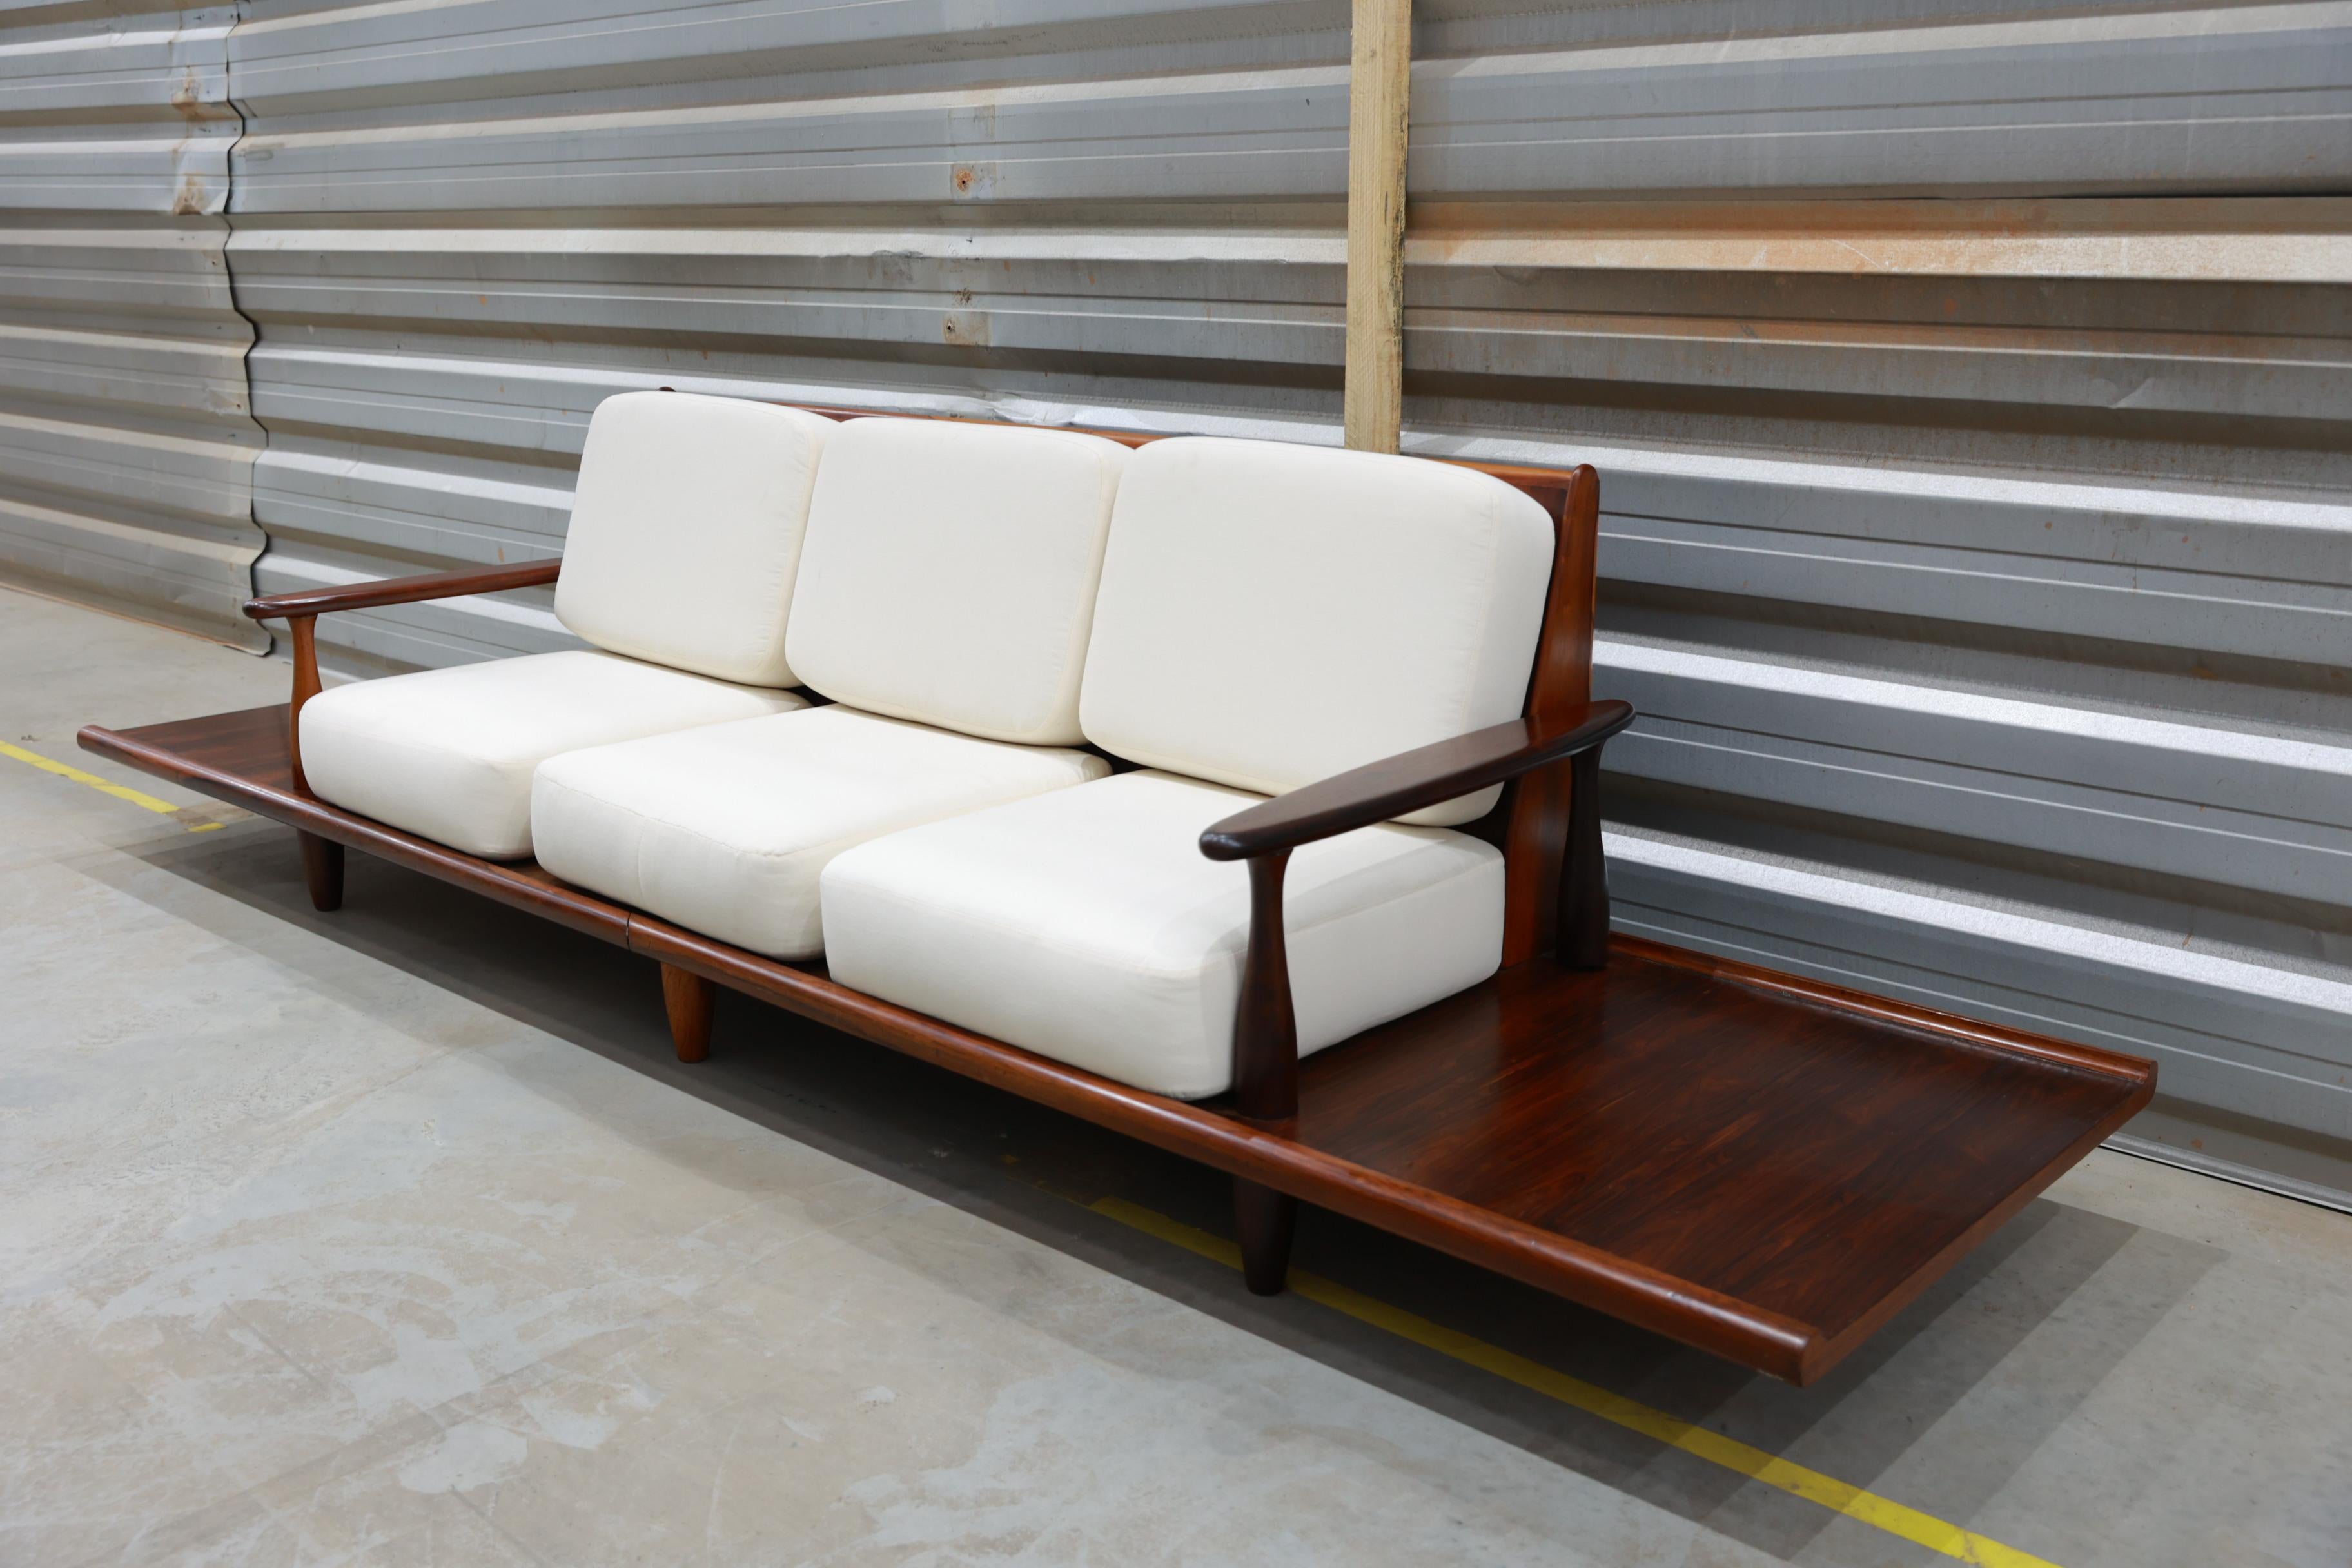 This sofa is made with Rosewood and it has been reupholstered with a beautiful off-white  fabric. What makes this sofa so unique are the built-in side tables (also made with Rosewood). The sofa and side tables are low, which allows for a comfortable